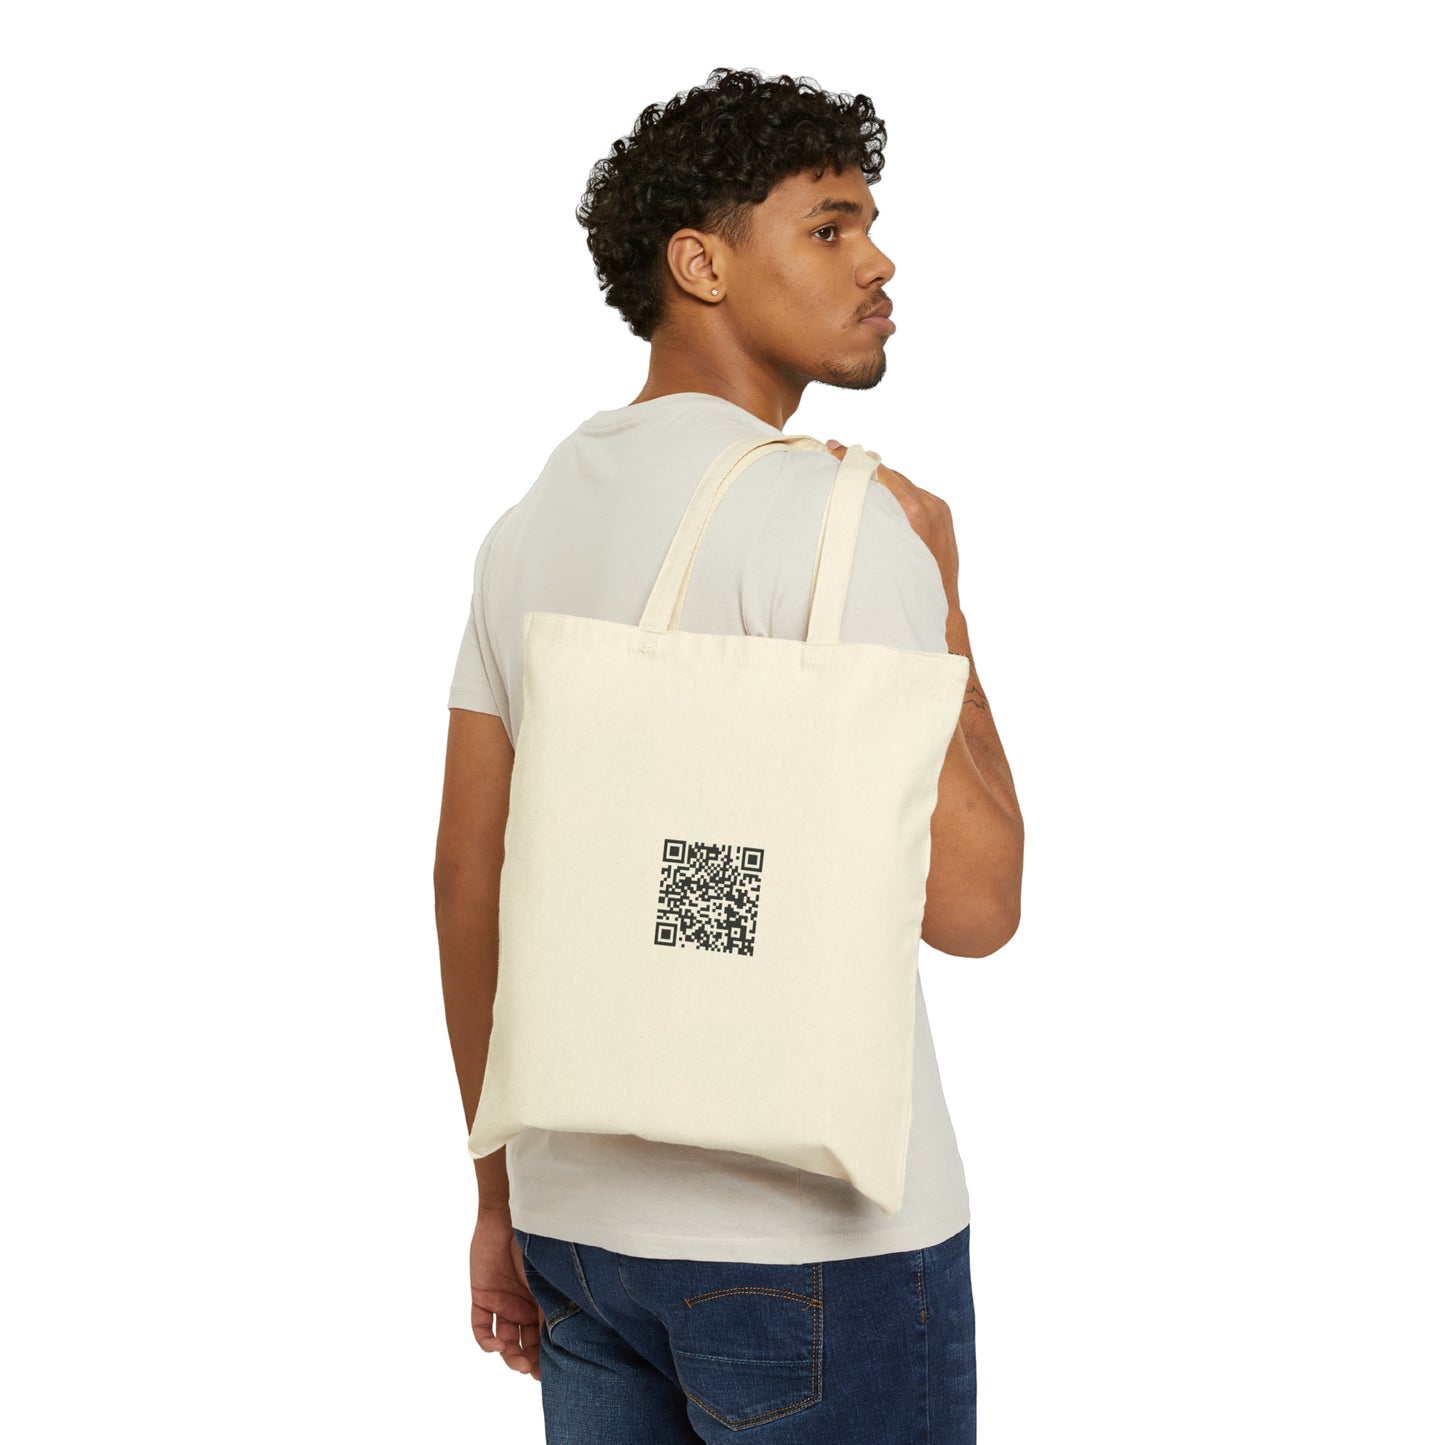 Call It Chemistry - Cotton Canvas Tote Bag